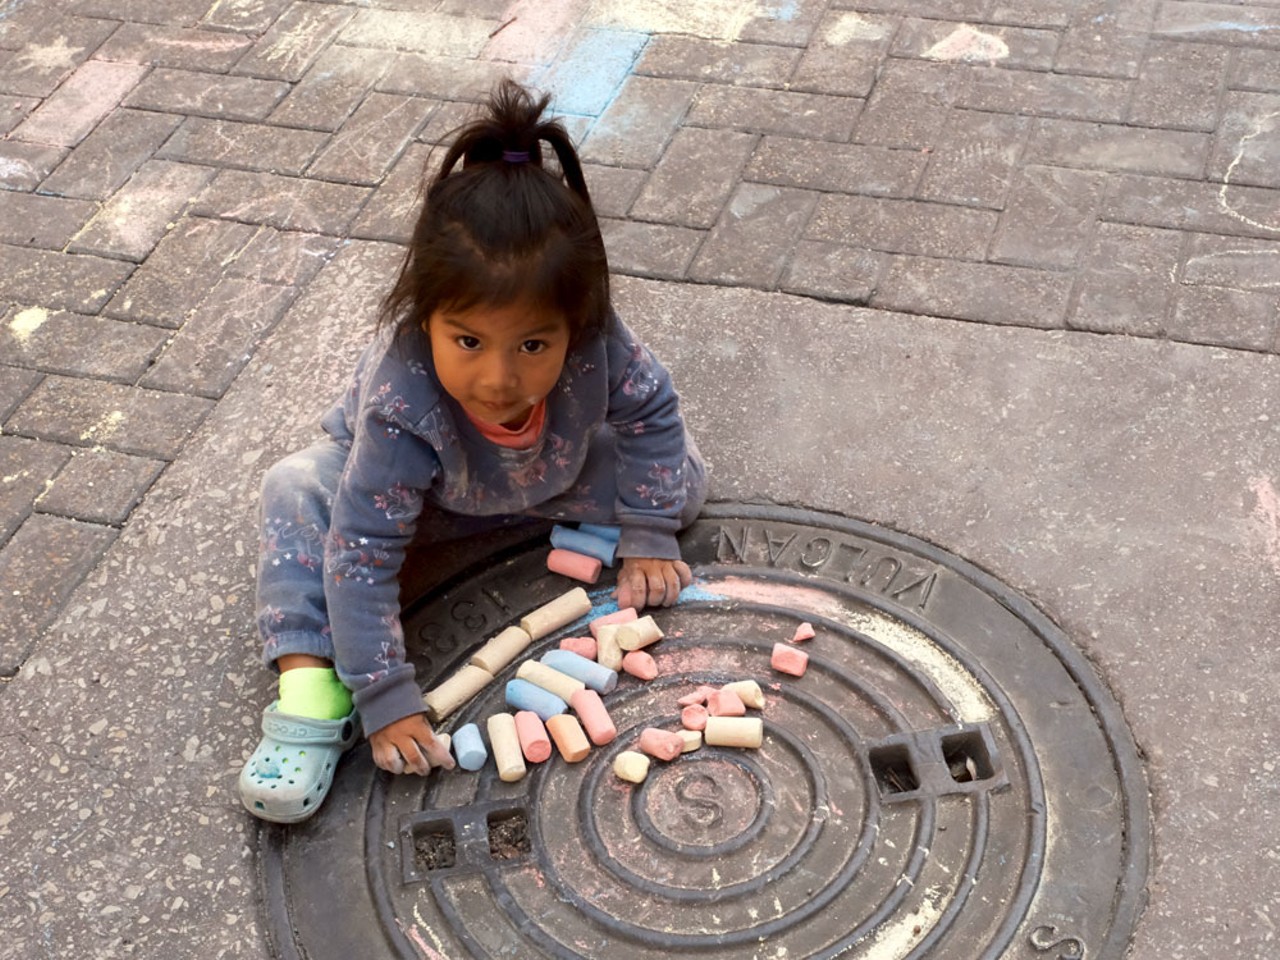 All the most creative moments from Artpace's Chalk It Up 2022